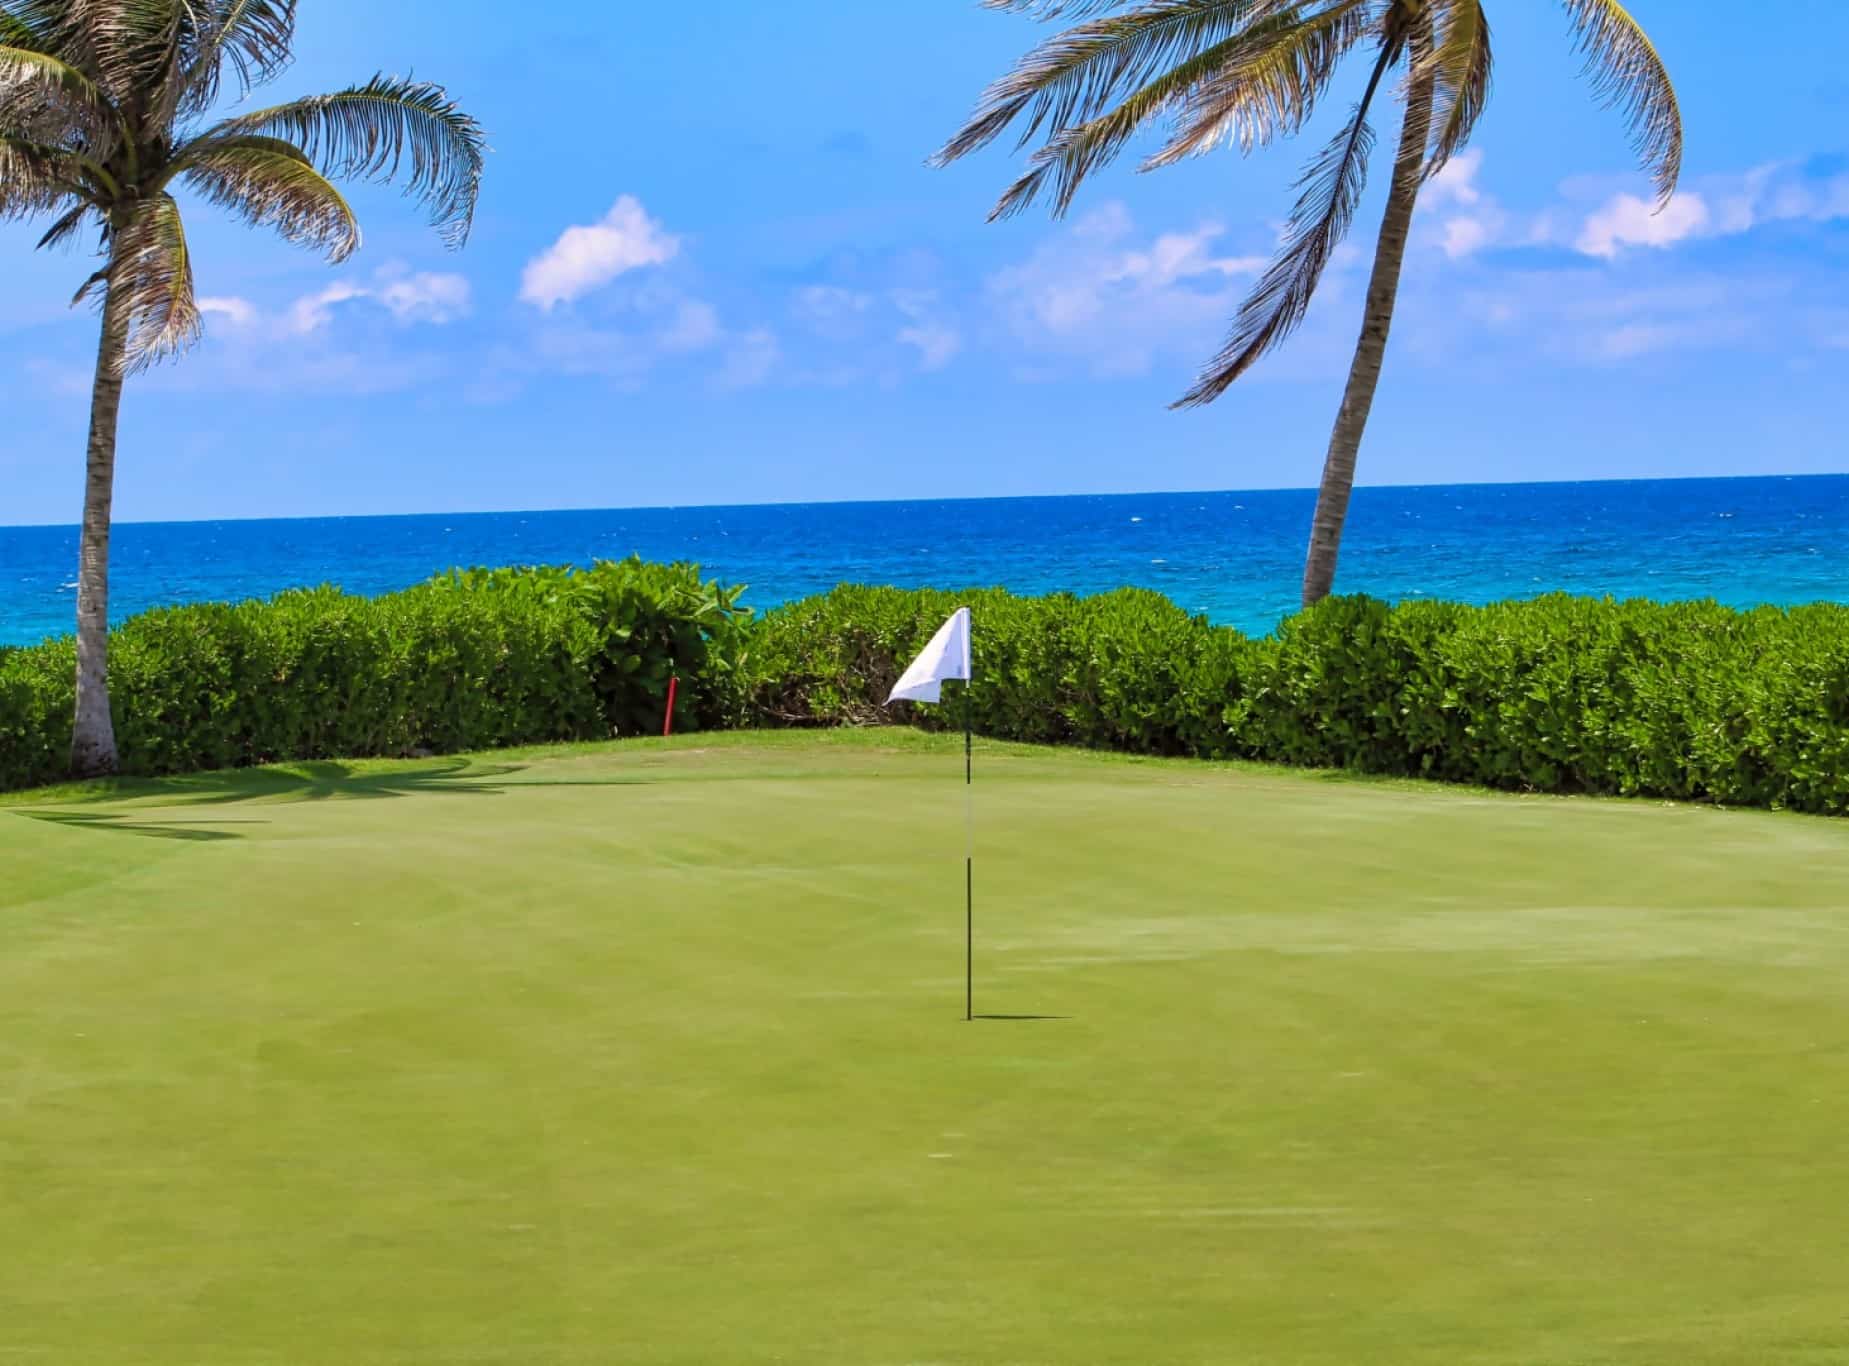 Golfing on Cinnamon Hill Golf Course from Montego Bay Cruise